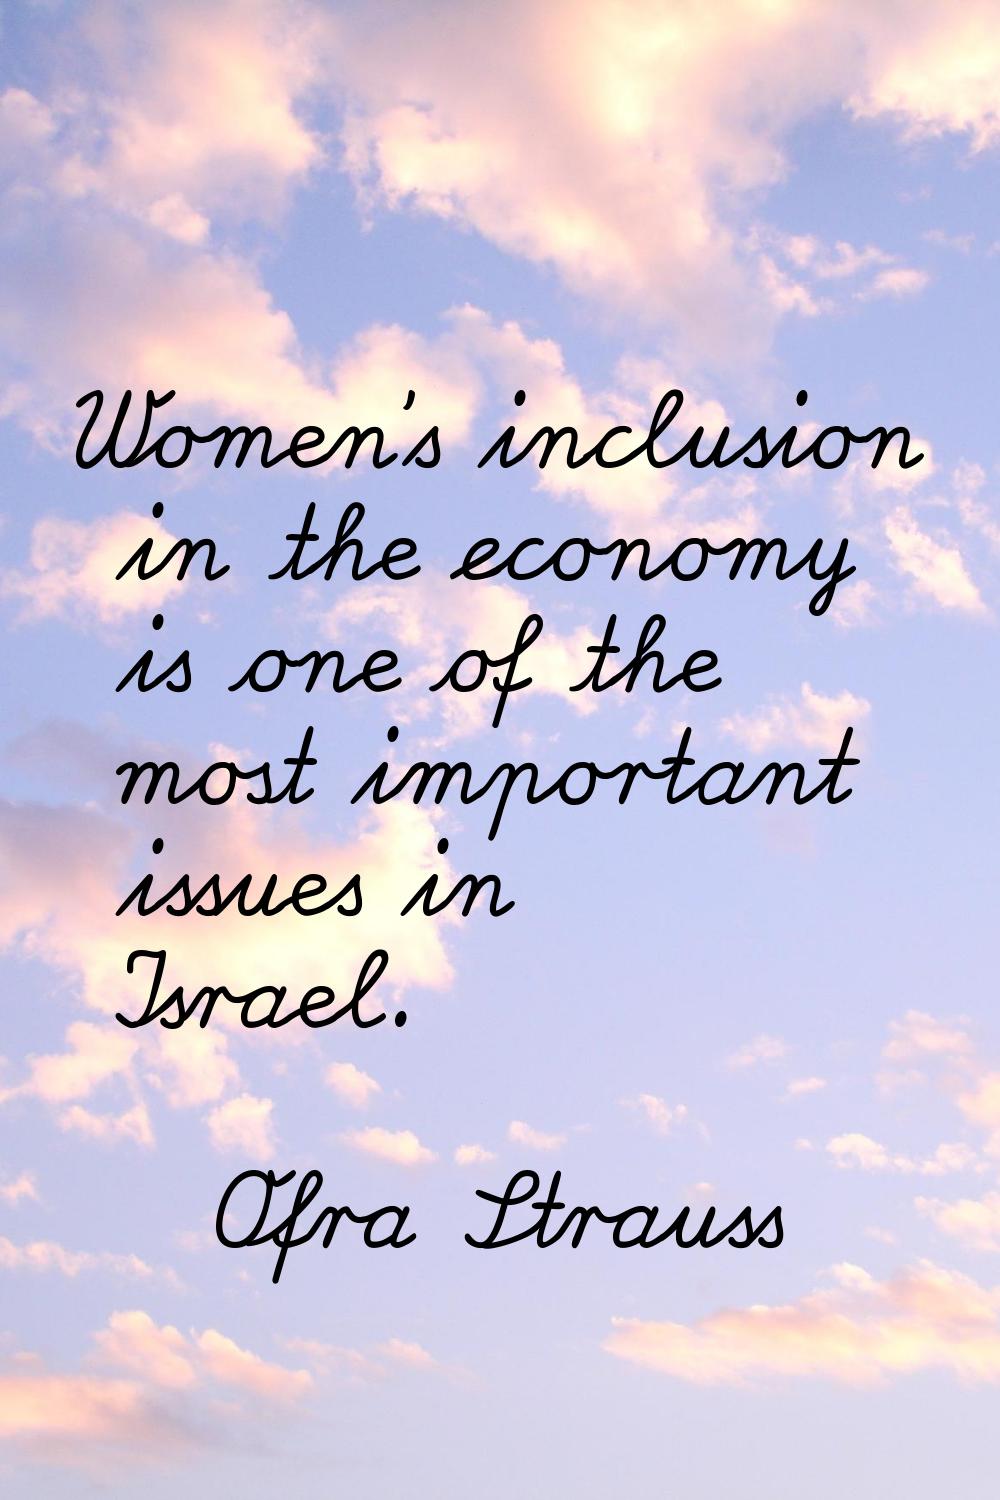 Women's inclusion in the economy is one of the most important issues in Israel.